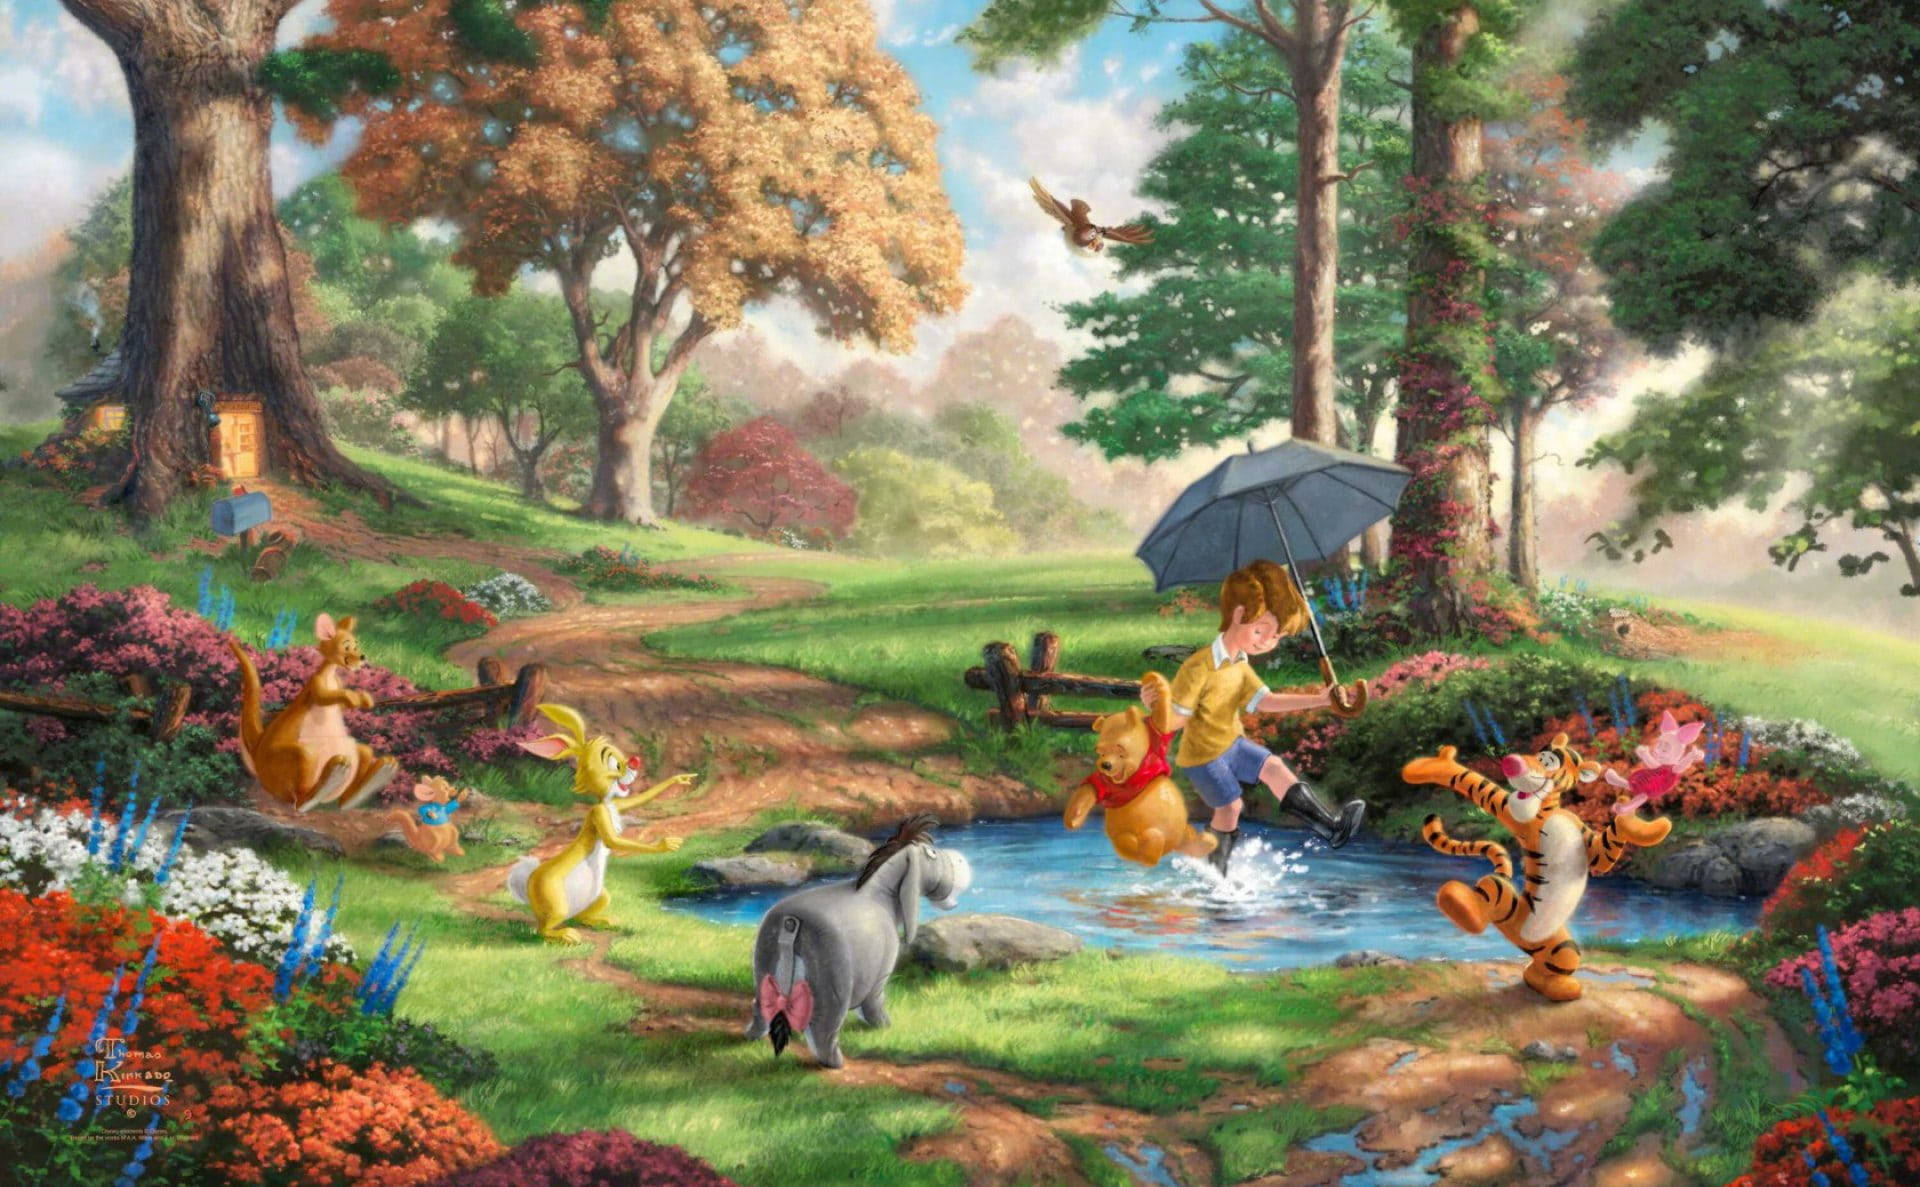 Artistic Painting Of Friends With Tigger 3d Wallpaper